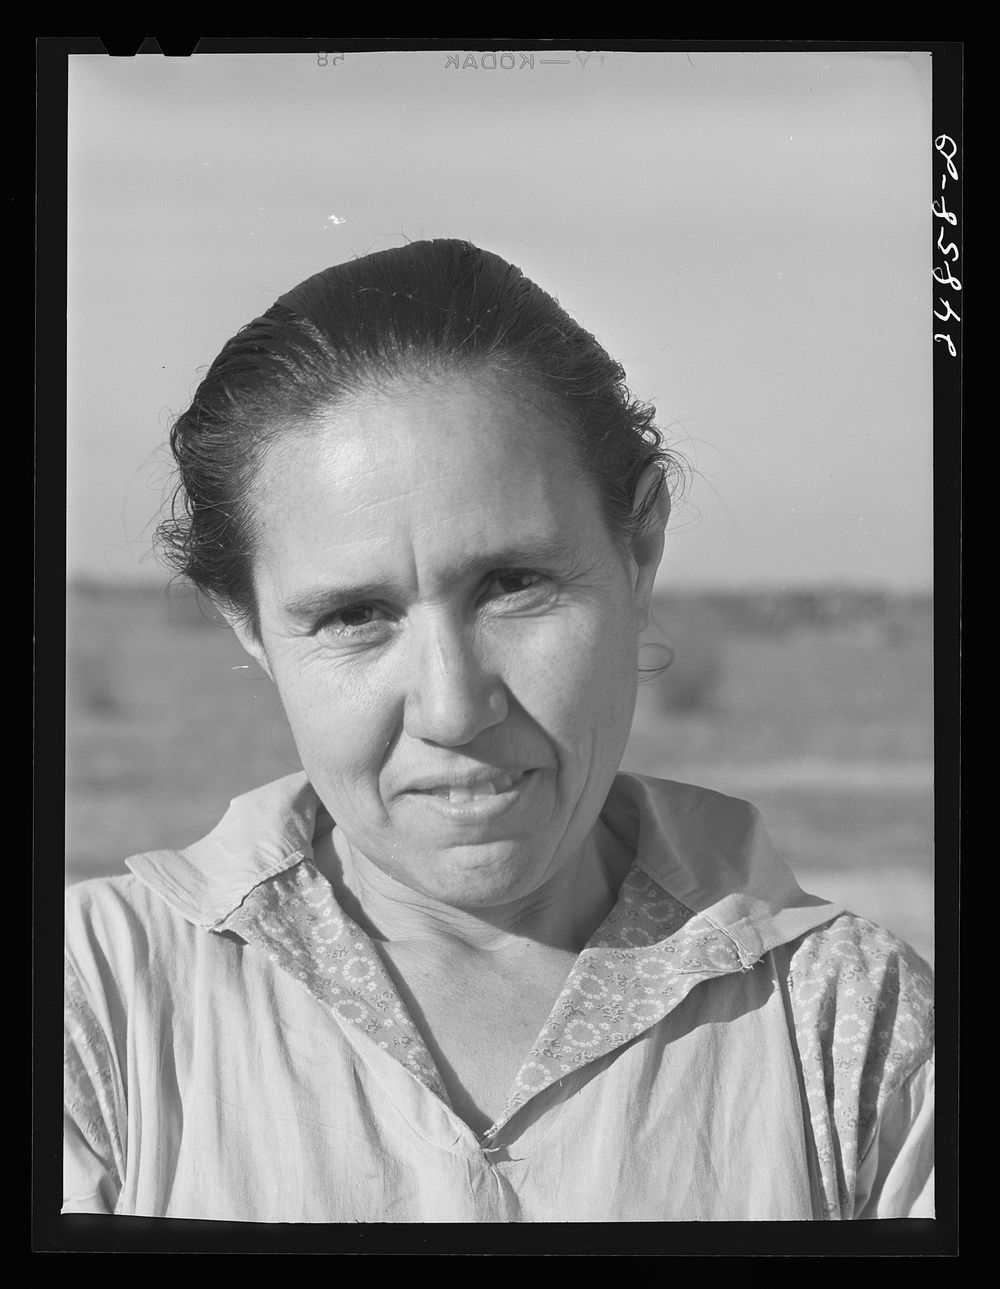 Wife of migratory worker. Robstown FSA (Farm Security Administration) camp, Texas. Sourced from the Library of Congress.